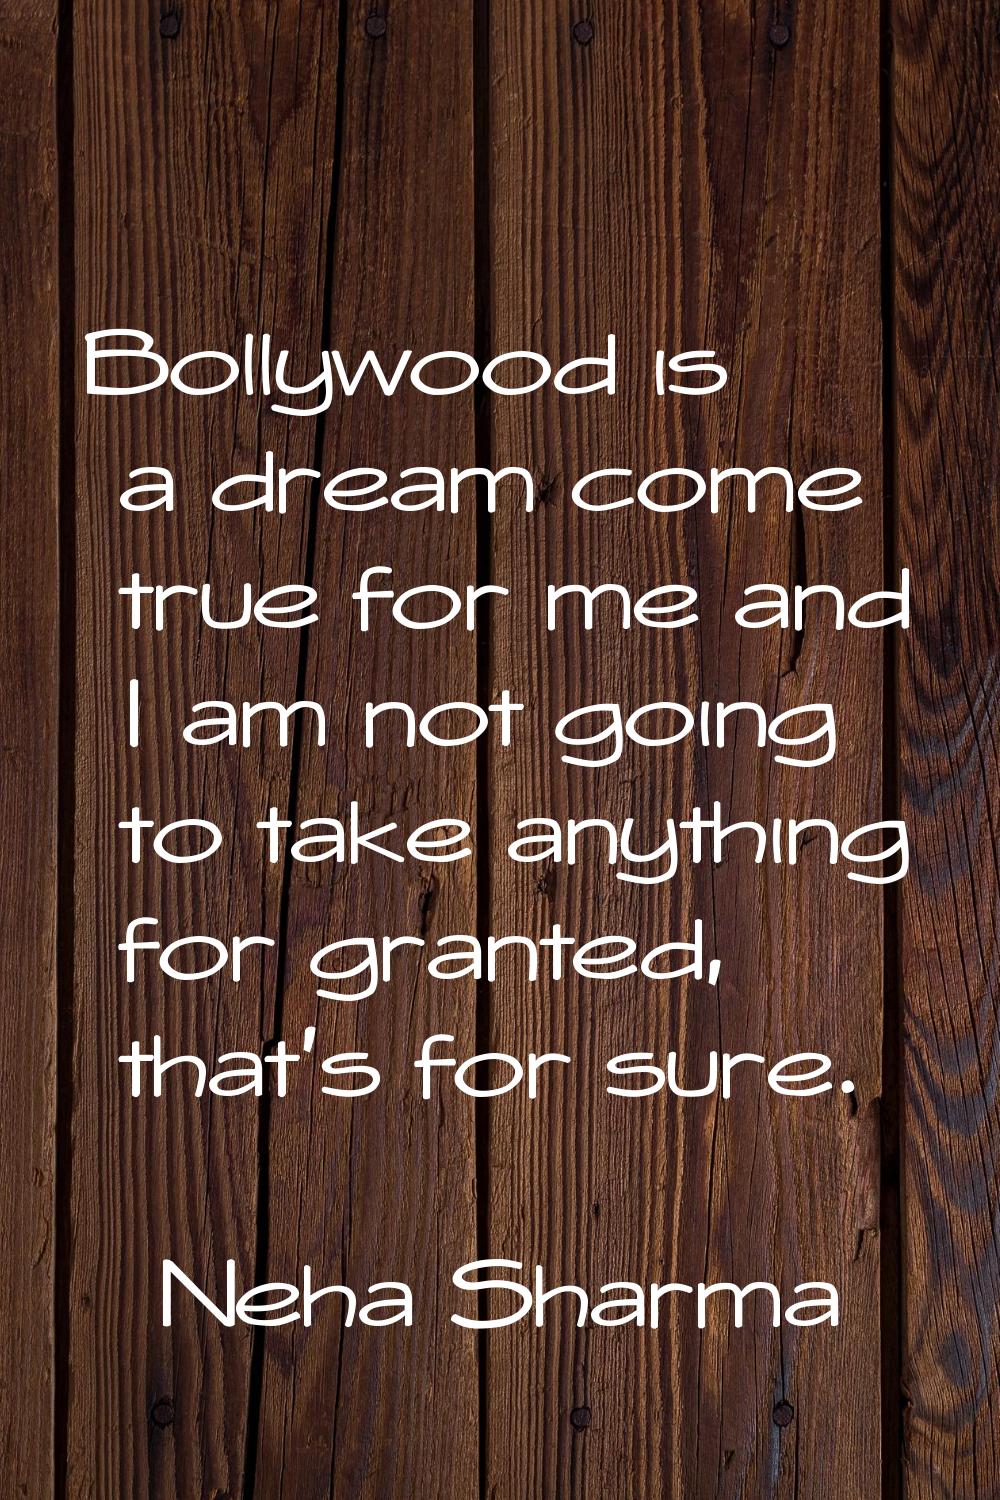 Bollywood is a dream come true for me and I am not going to take anything for granted, that's for s